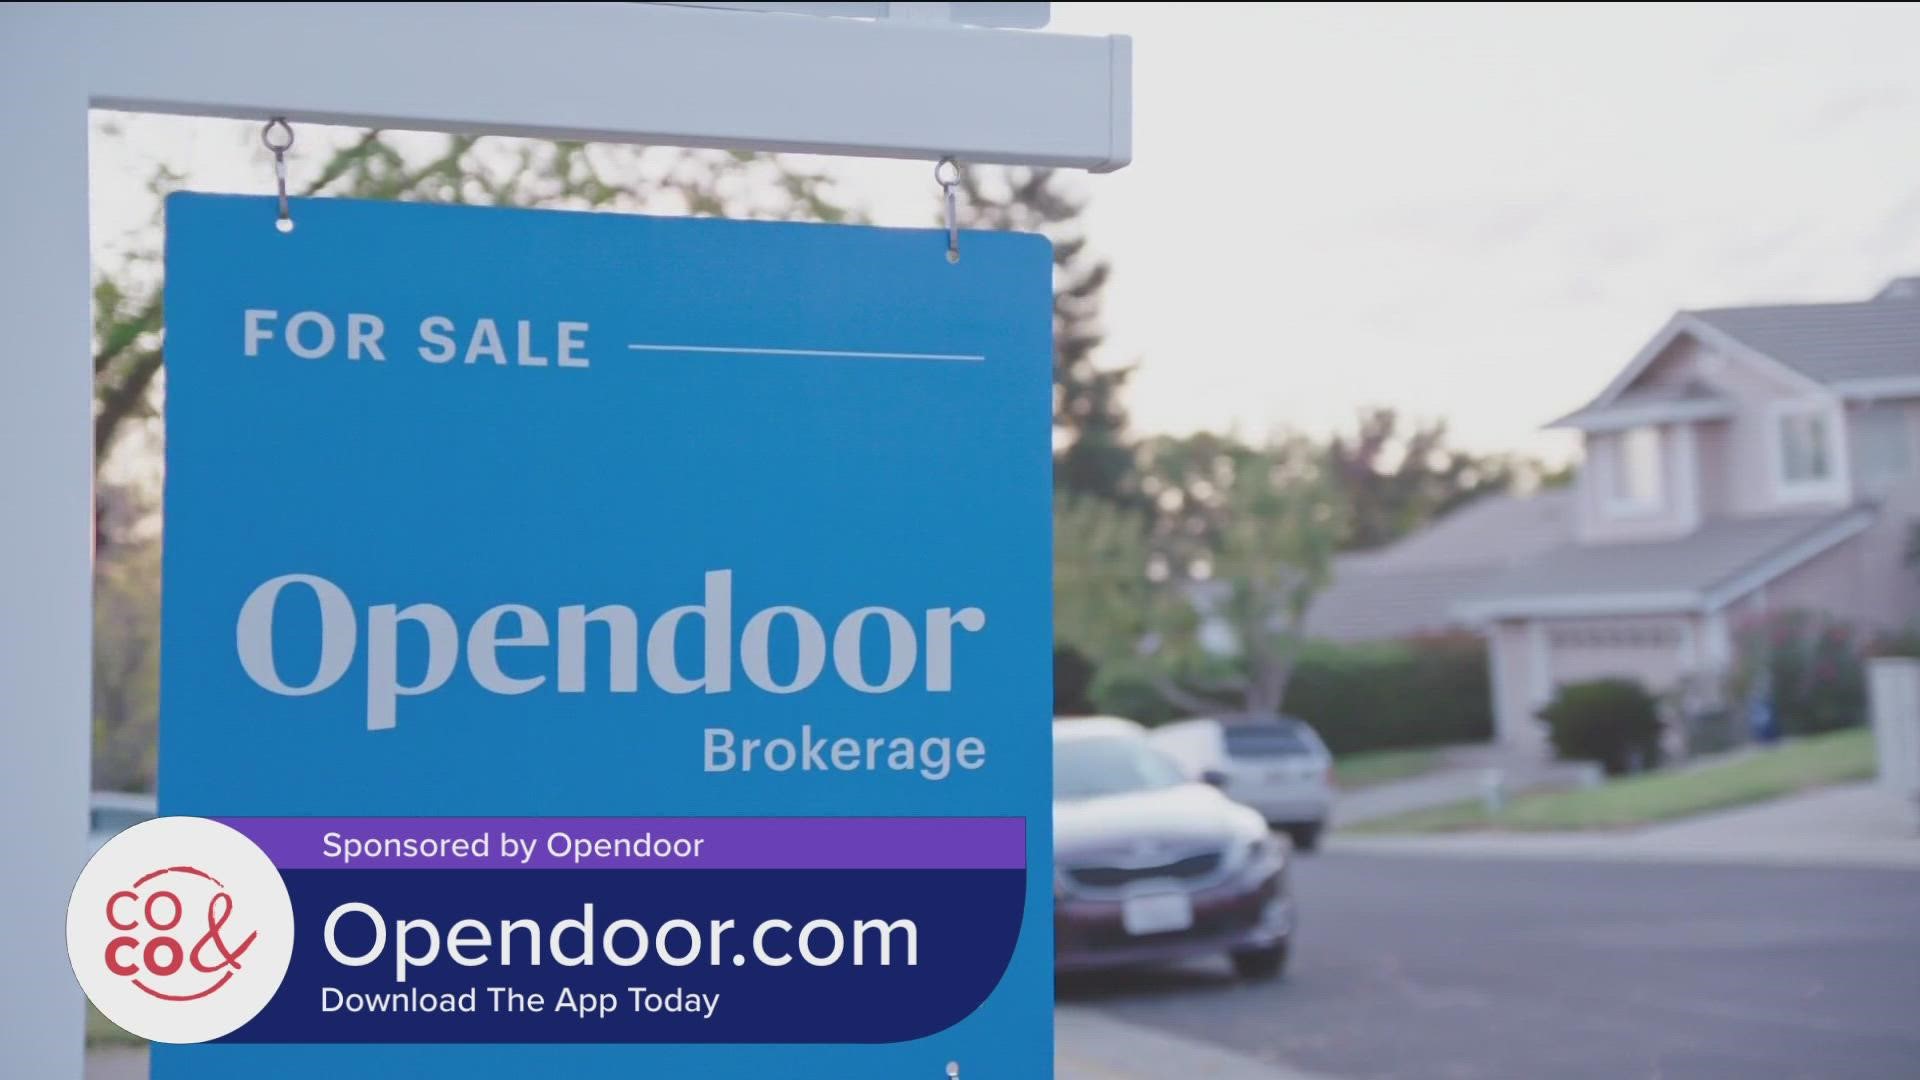 Visit Opendoor.com to request a no-cost, no-obligation offer, or download the app today! **PAID CONTENT**